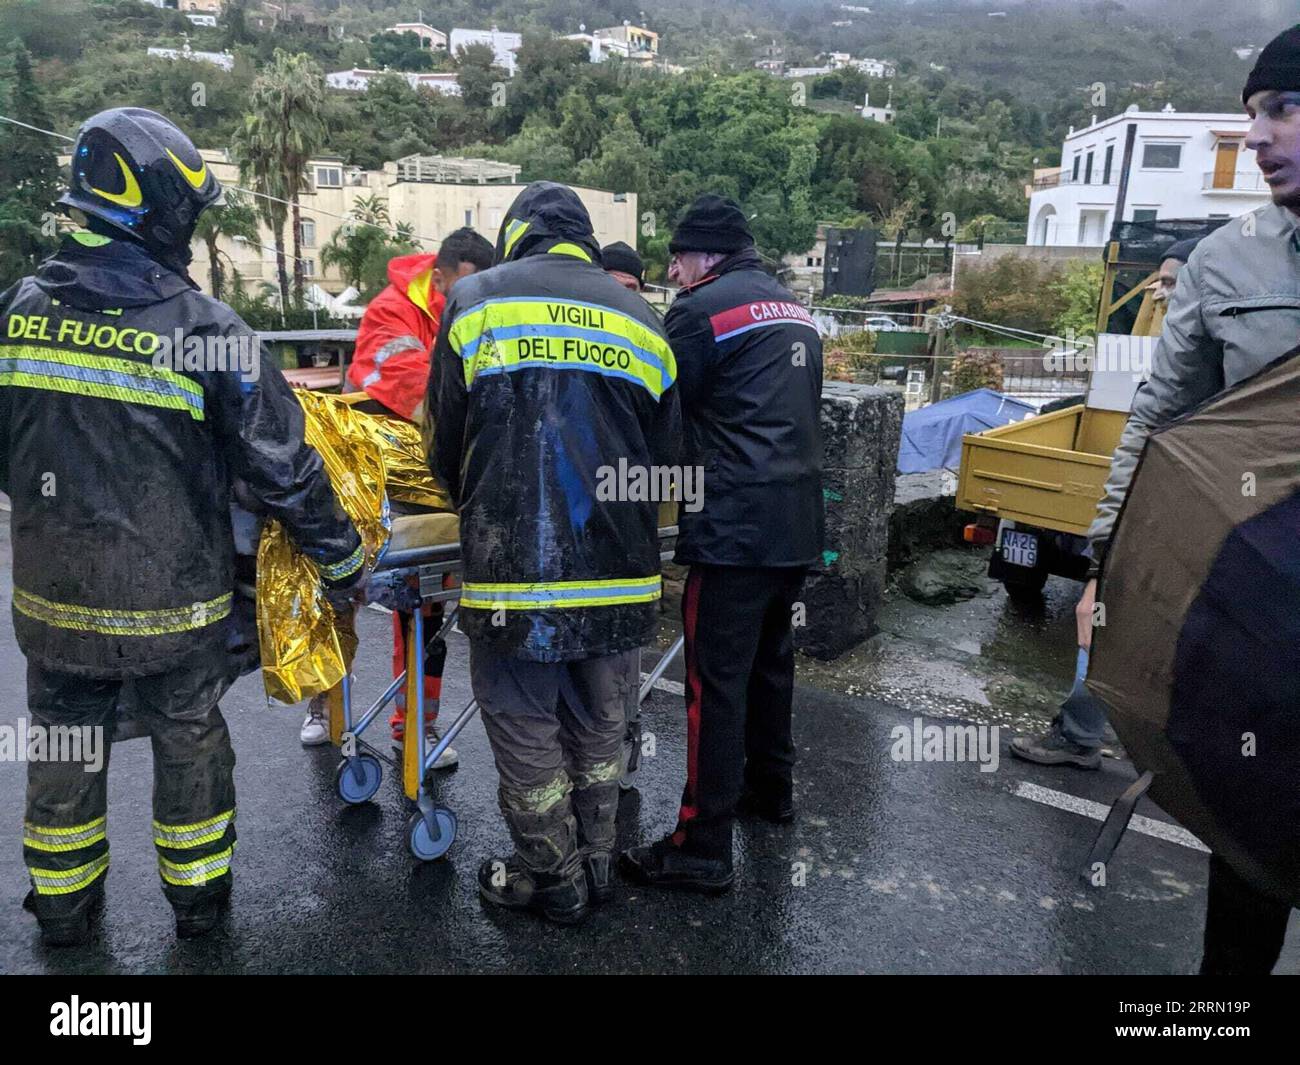 221127 -- ROME, Nov. 27, 2022 -- Emergency staff members transfer an injured person after a landslide on the island of Ischia, Italy, Nov. 26, 2022. At least one person died and several others went missing in the island of Ischia in southern Italy on Saturday, after heavy rains triggered a landslide hitting several residential buildings, according to authorities and local media. Italian Carabinieri/Handout via Xinhua ITALY-ISCHIA ISLAND-LANDSLIDE JinxMamengni PUBLICATIONxNOTxINxCHN Stock Photo